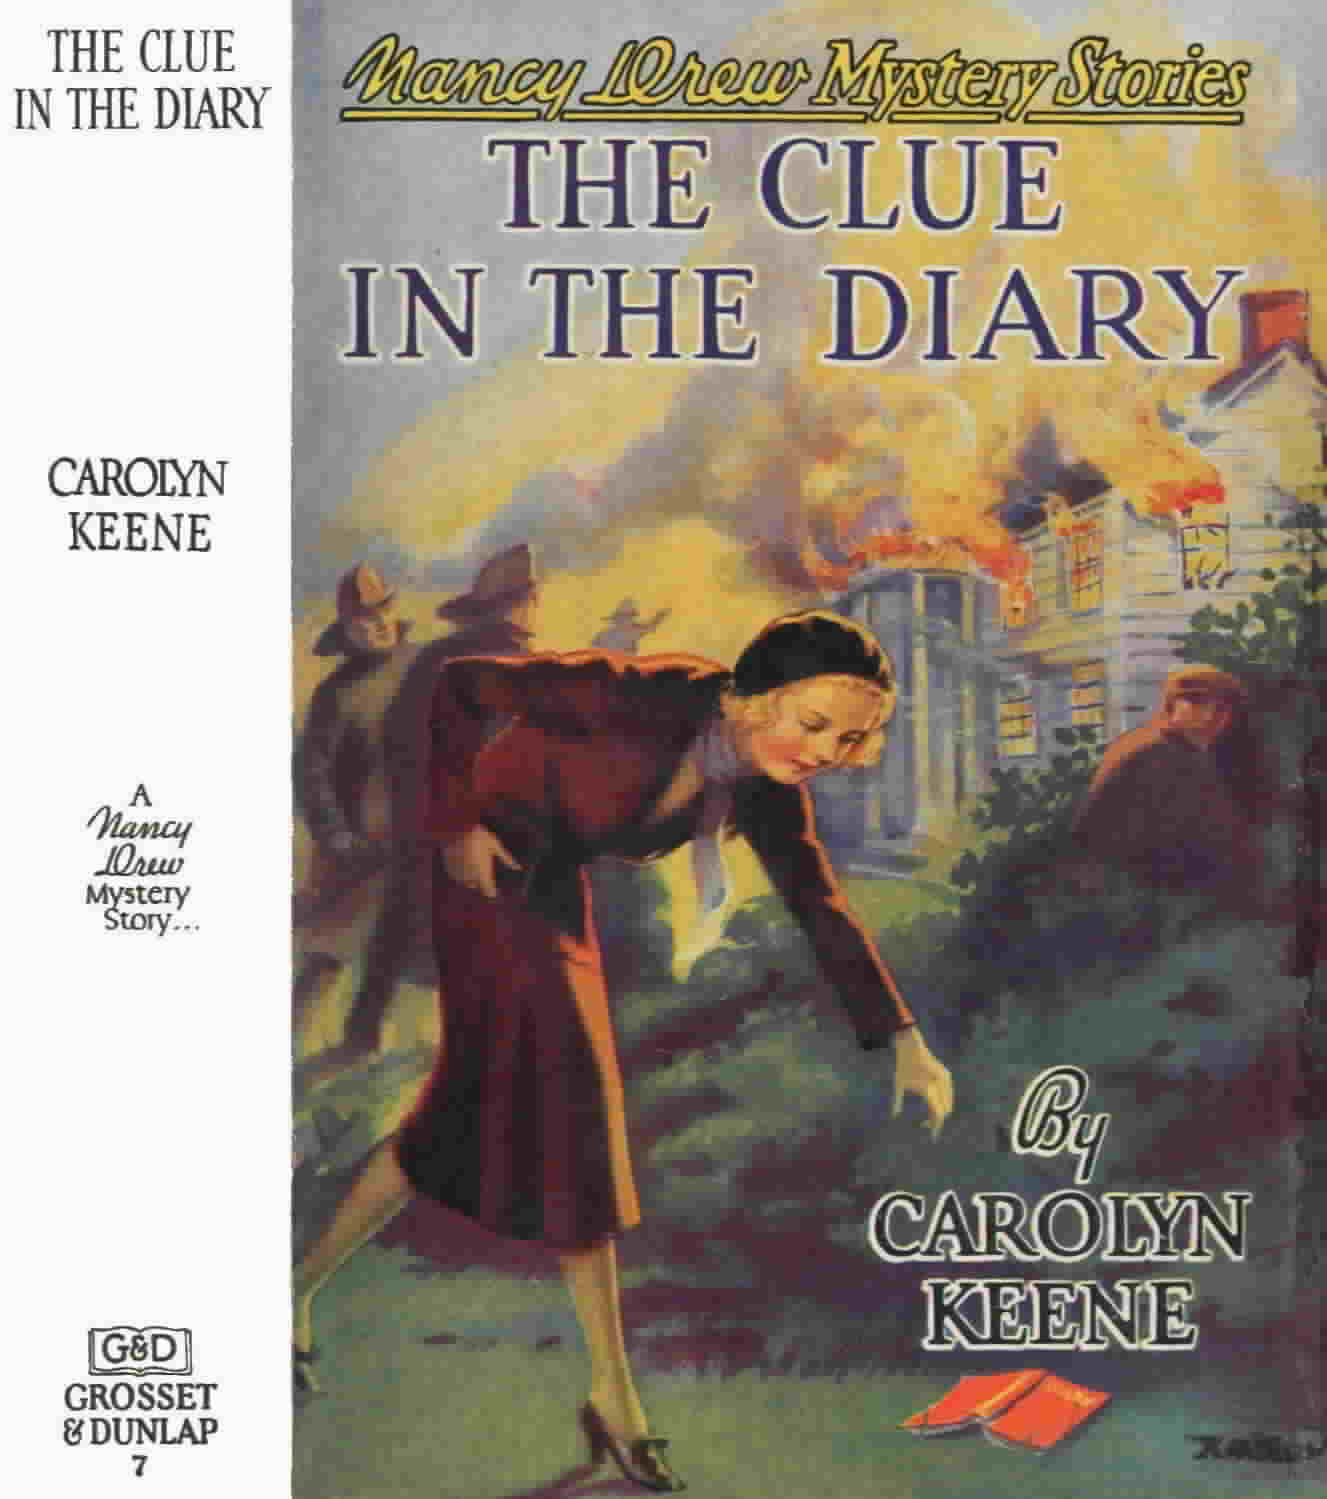 The Clue in the Diary